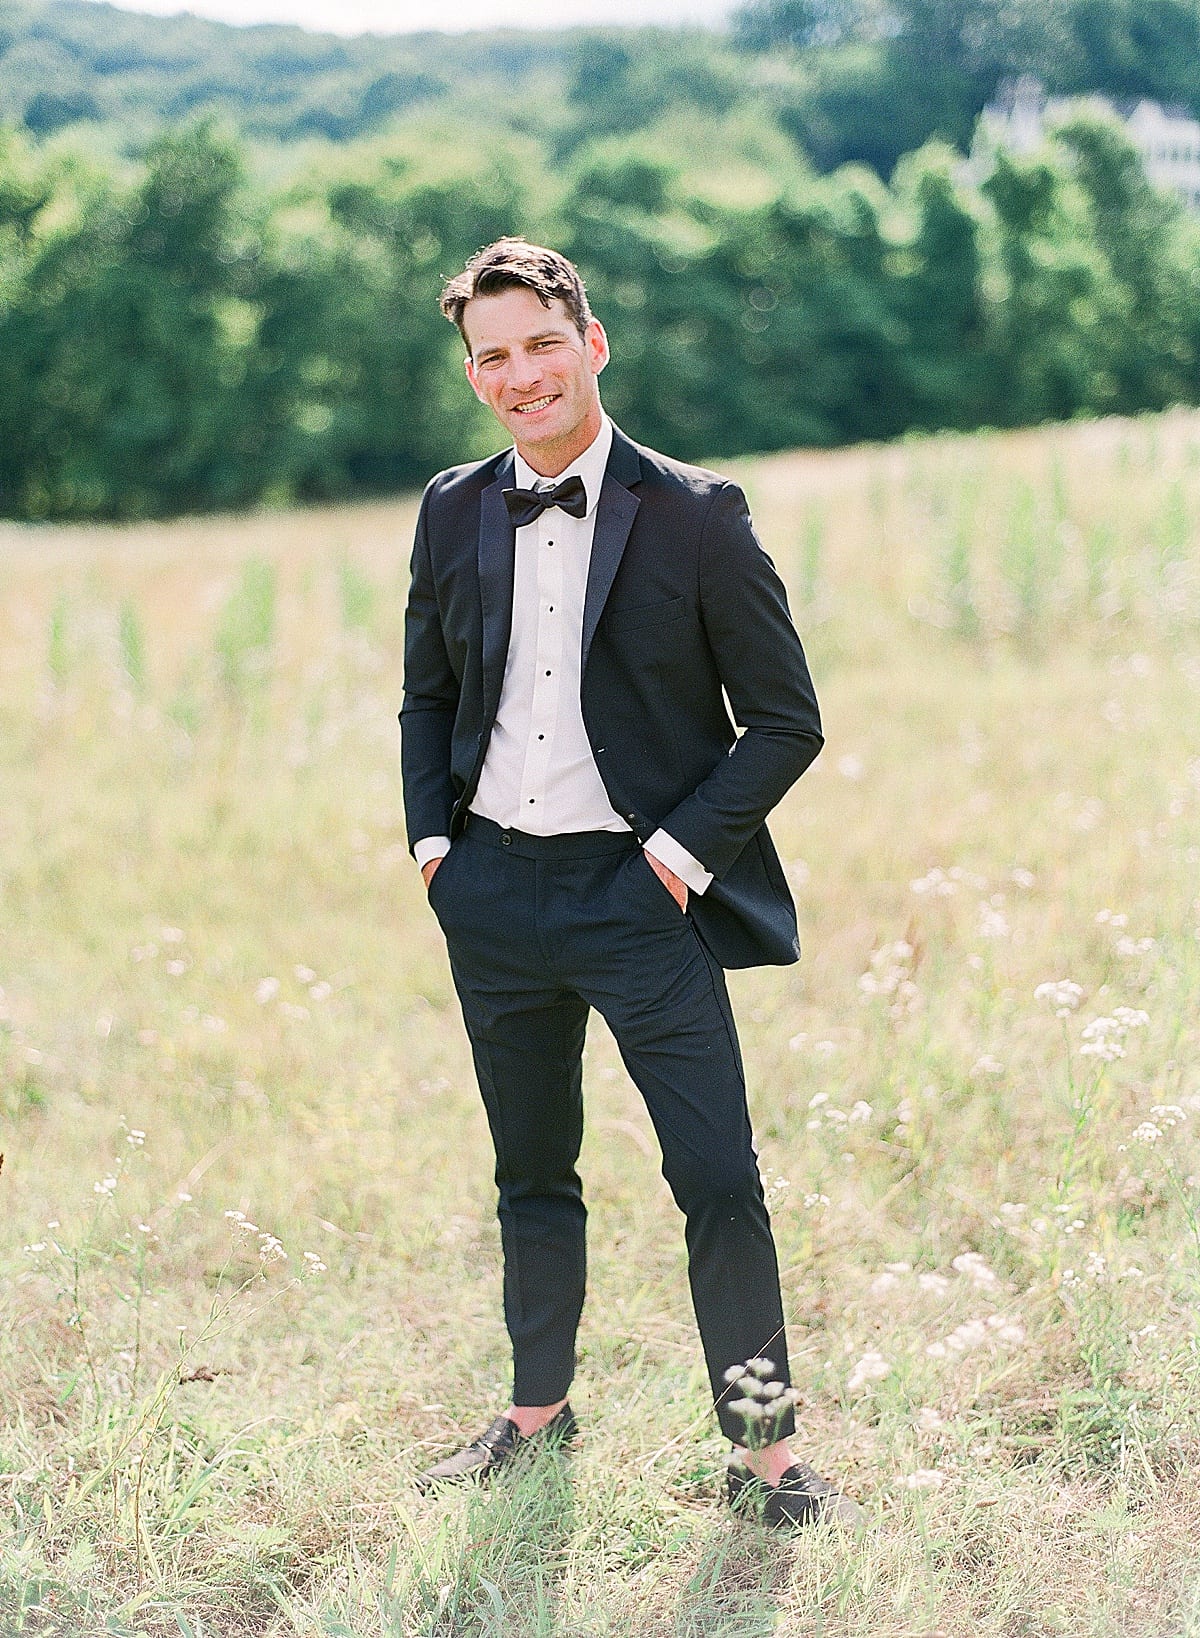 Groom Smiling at Camera in Field Photo